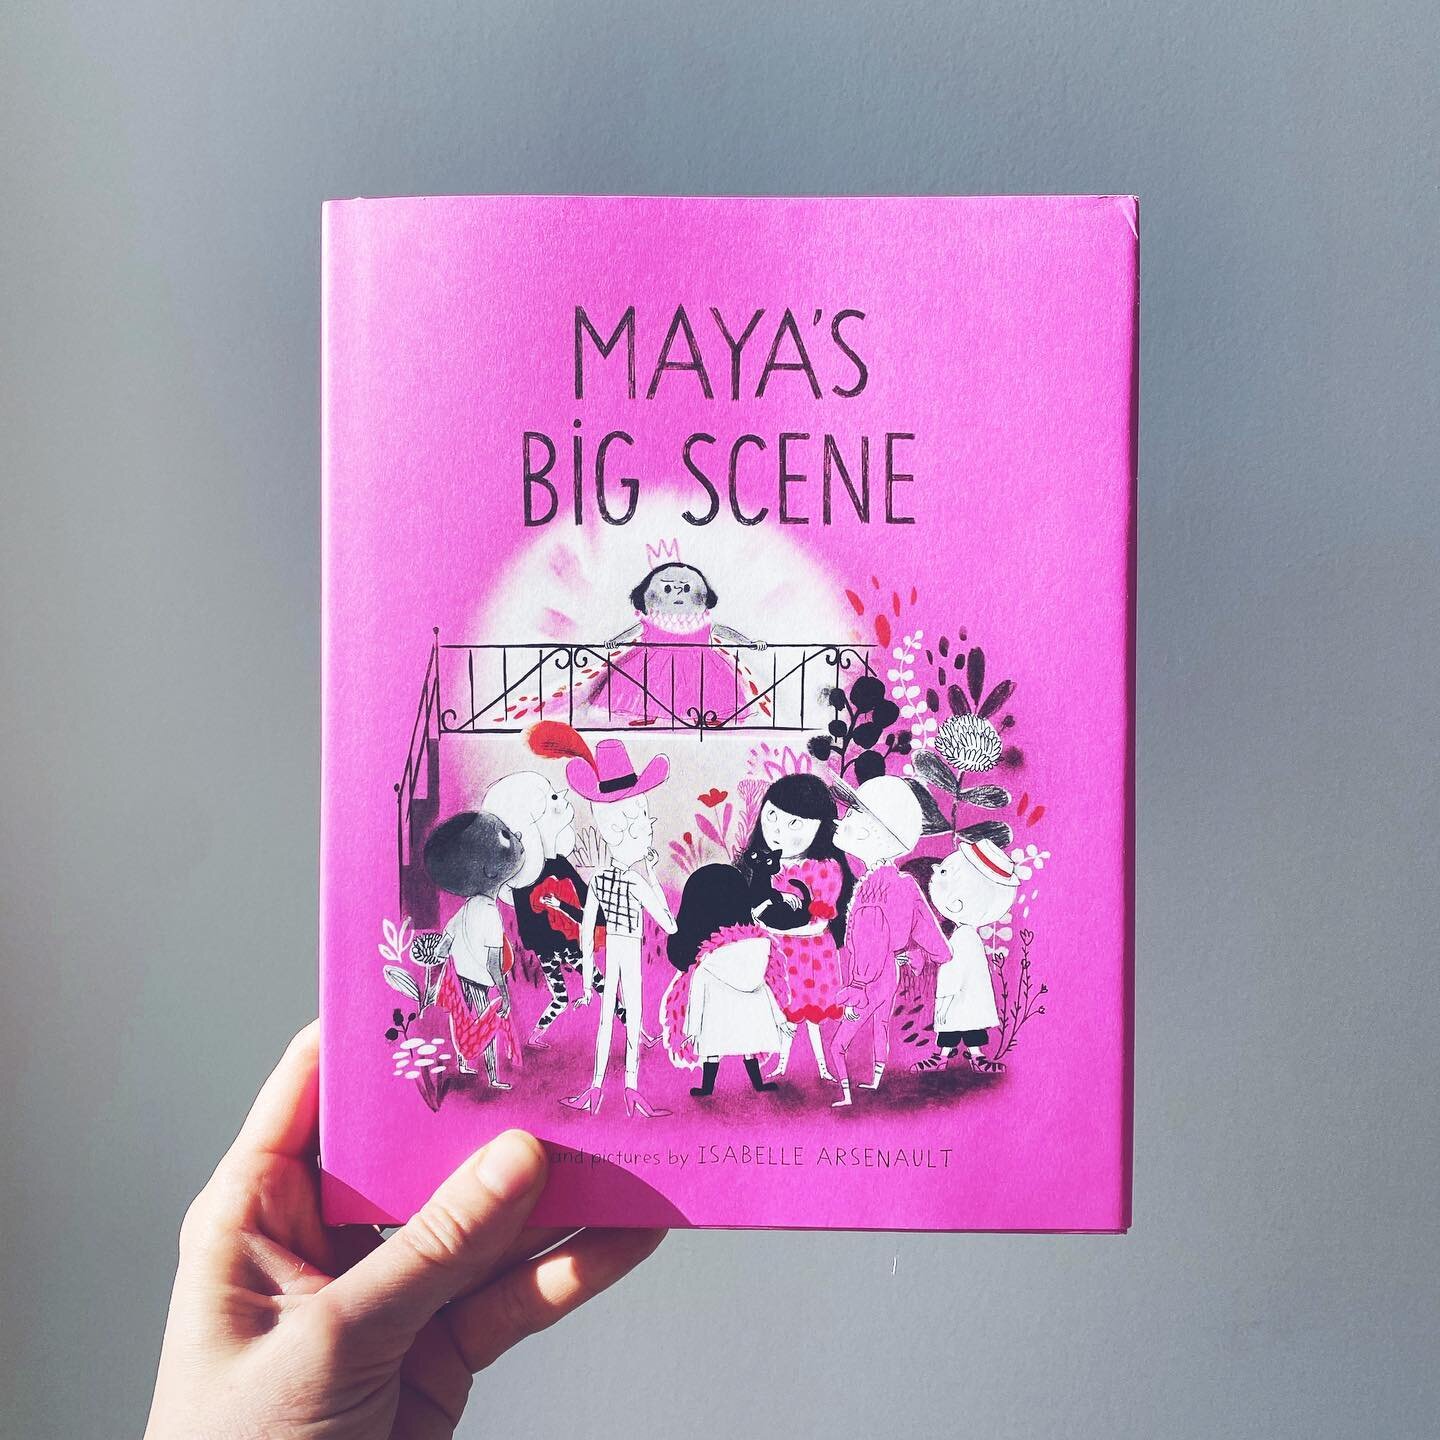 Yayyy! Maya&rsquo;s Big Scene is now available in bookstores🥳 In this new Mile End kids story, Maya's imagination sets the stage for her friends to act out her revolutionary play. Fun! But can she make room in her queendom for the will of the people